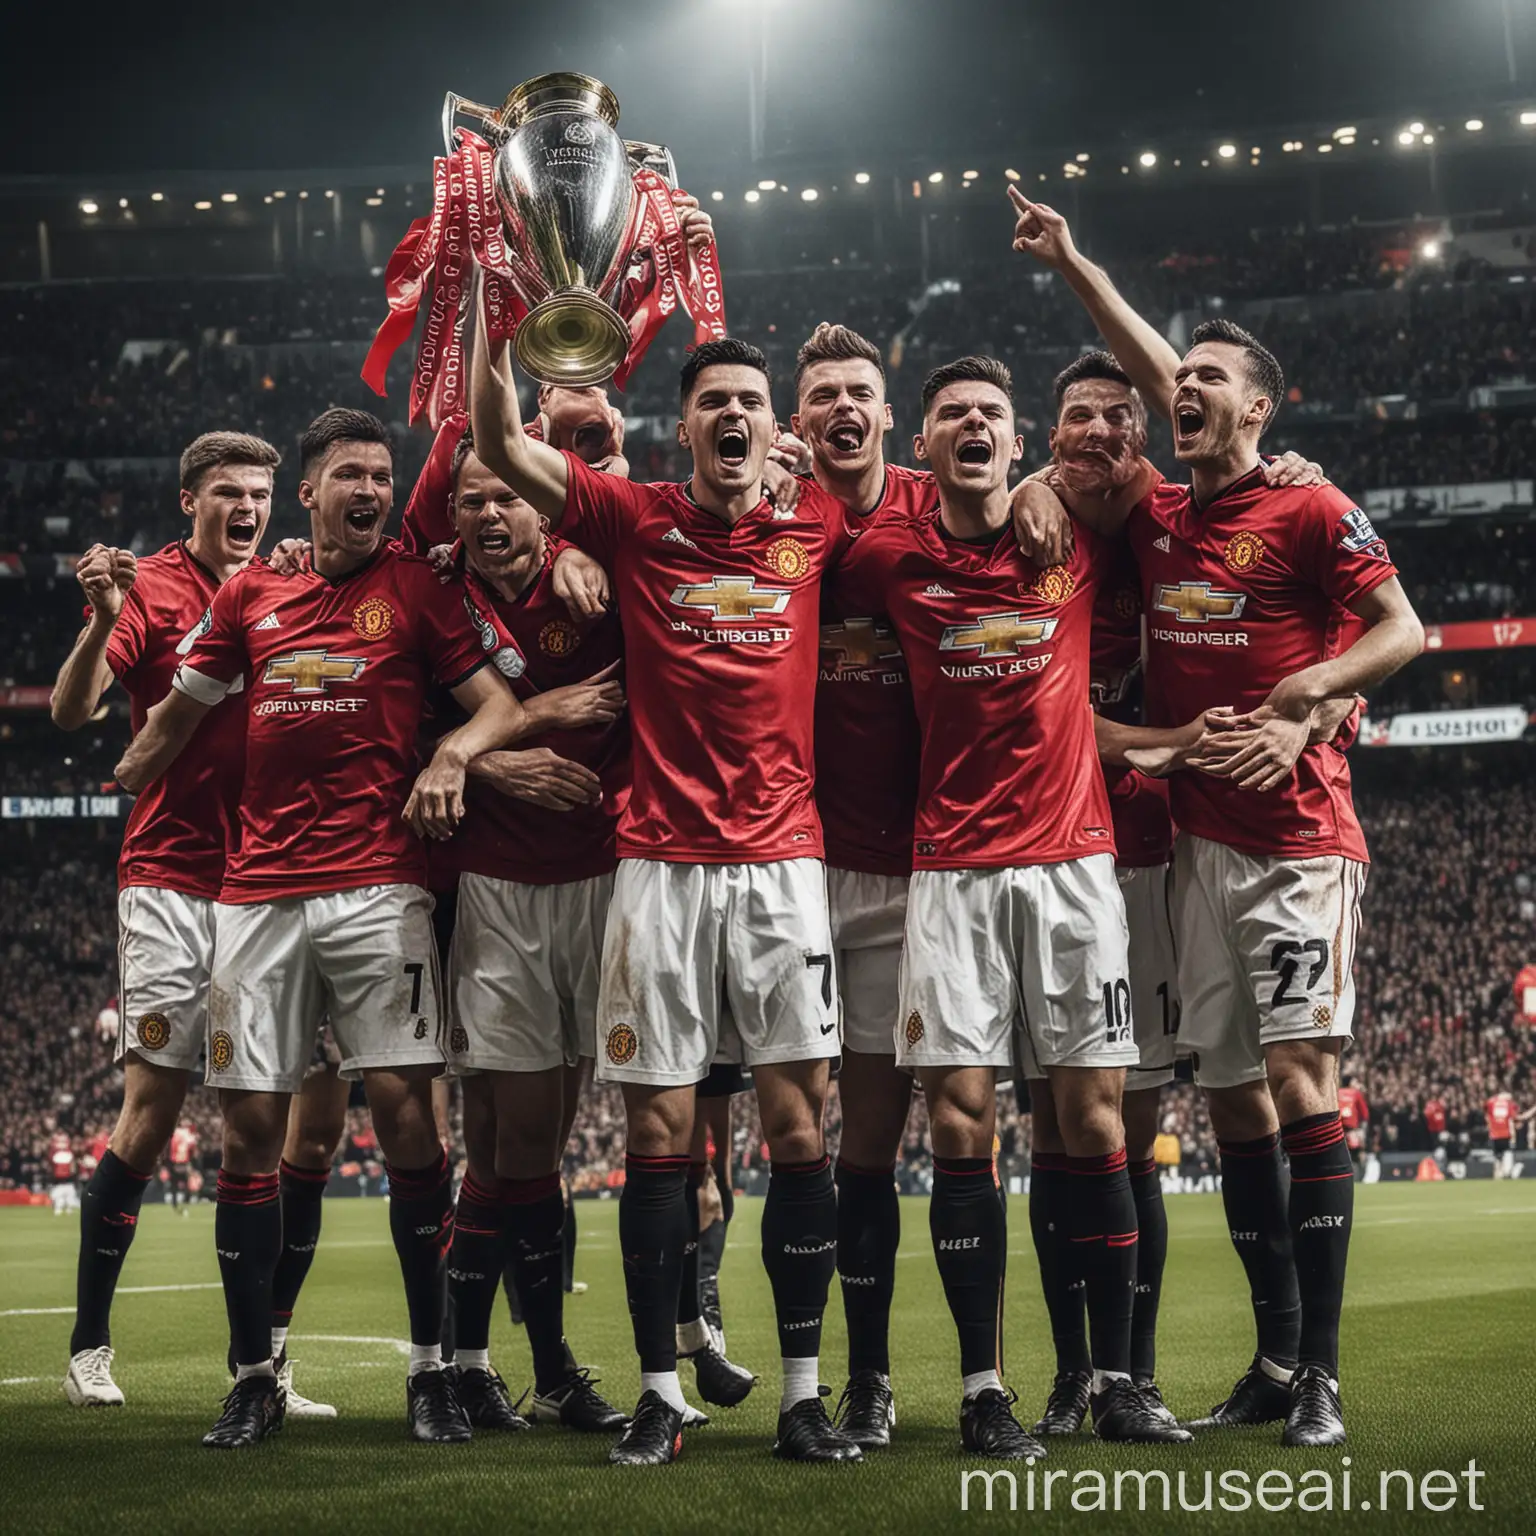 create an image of Manchester United winning champions league